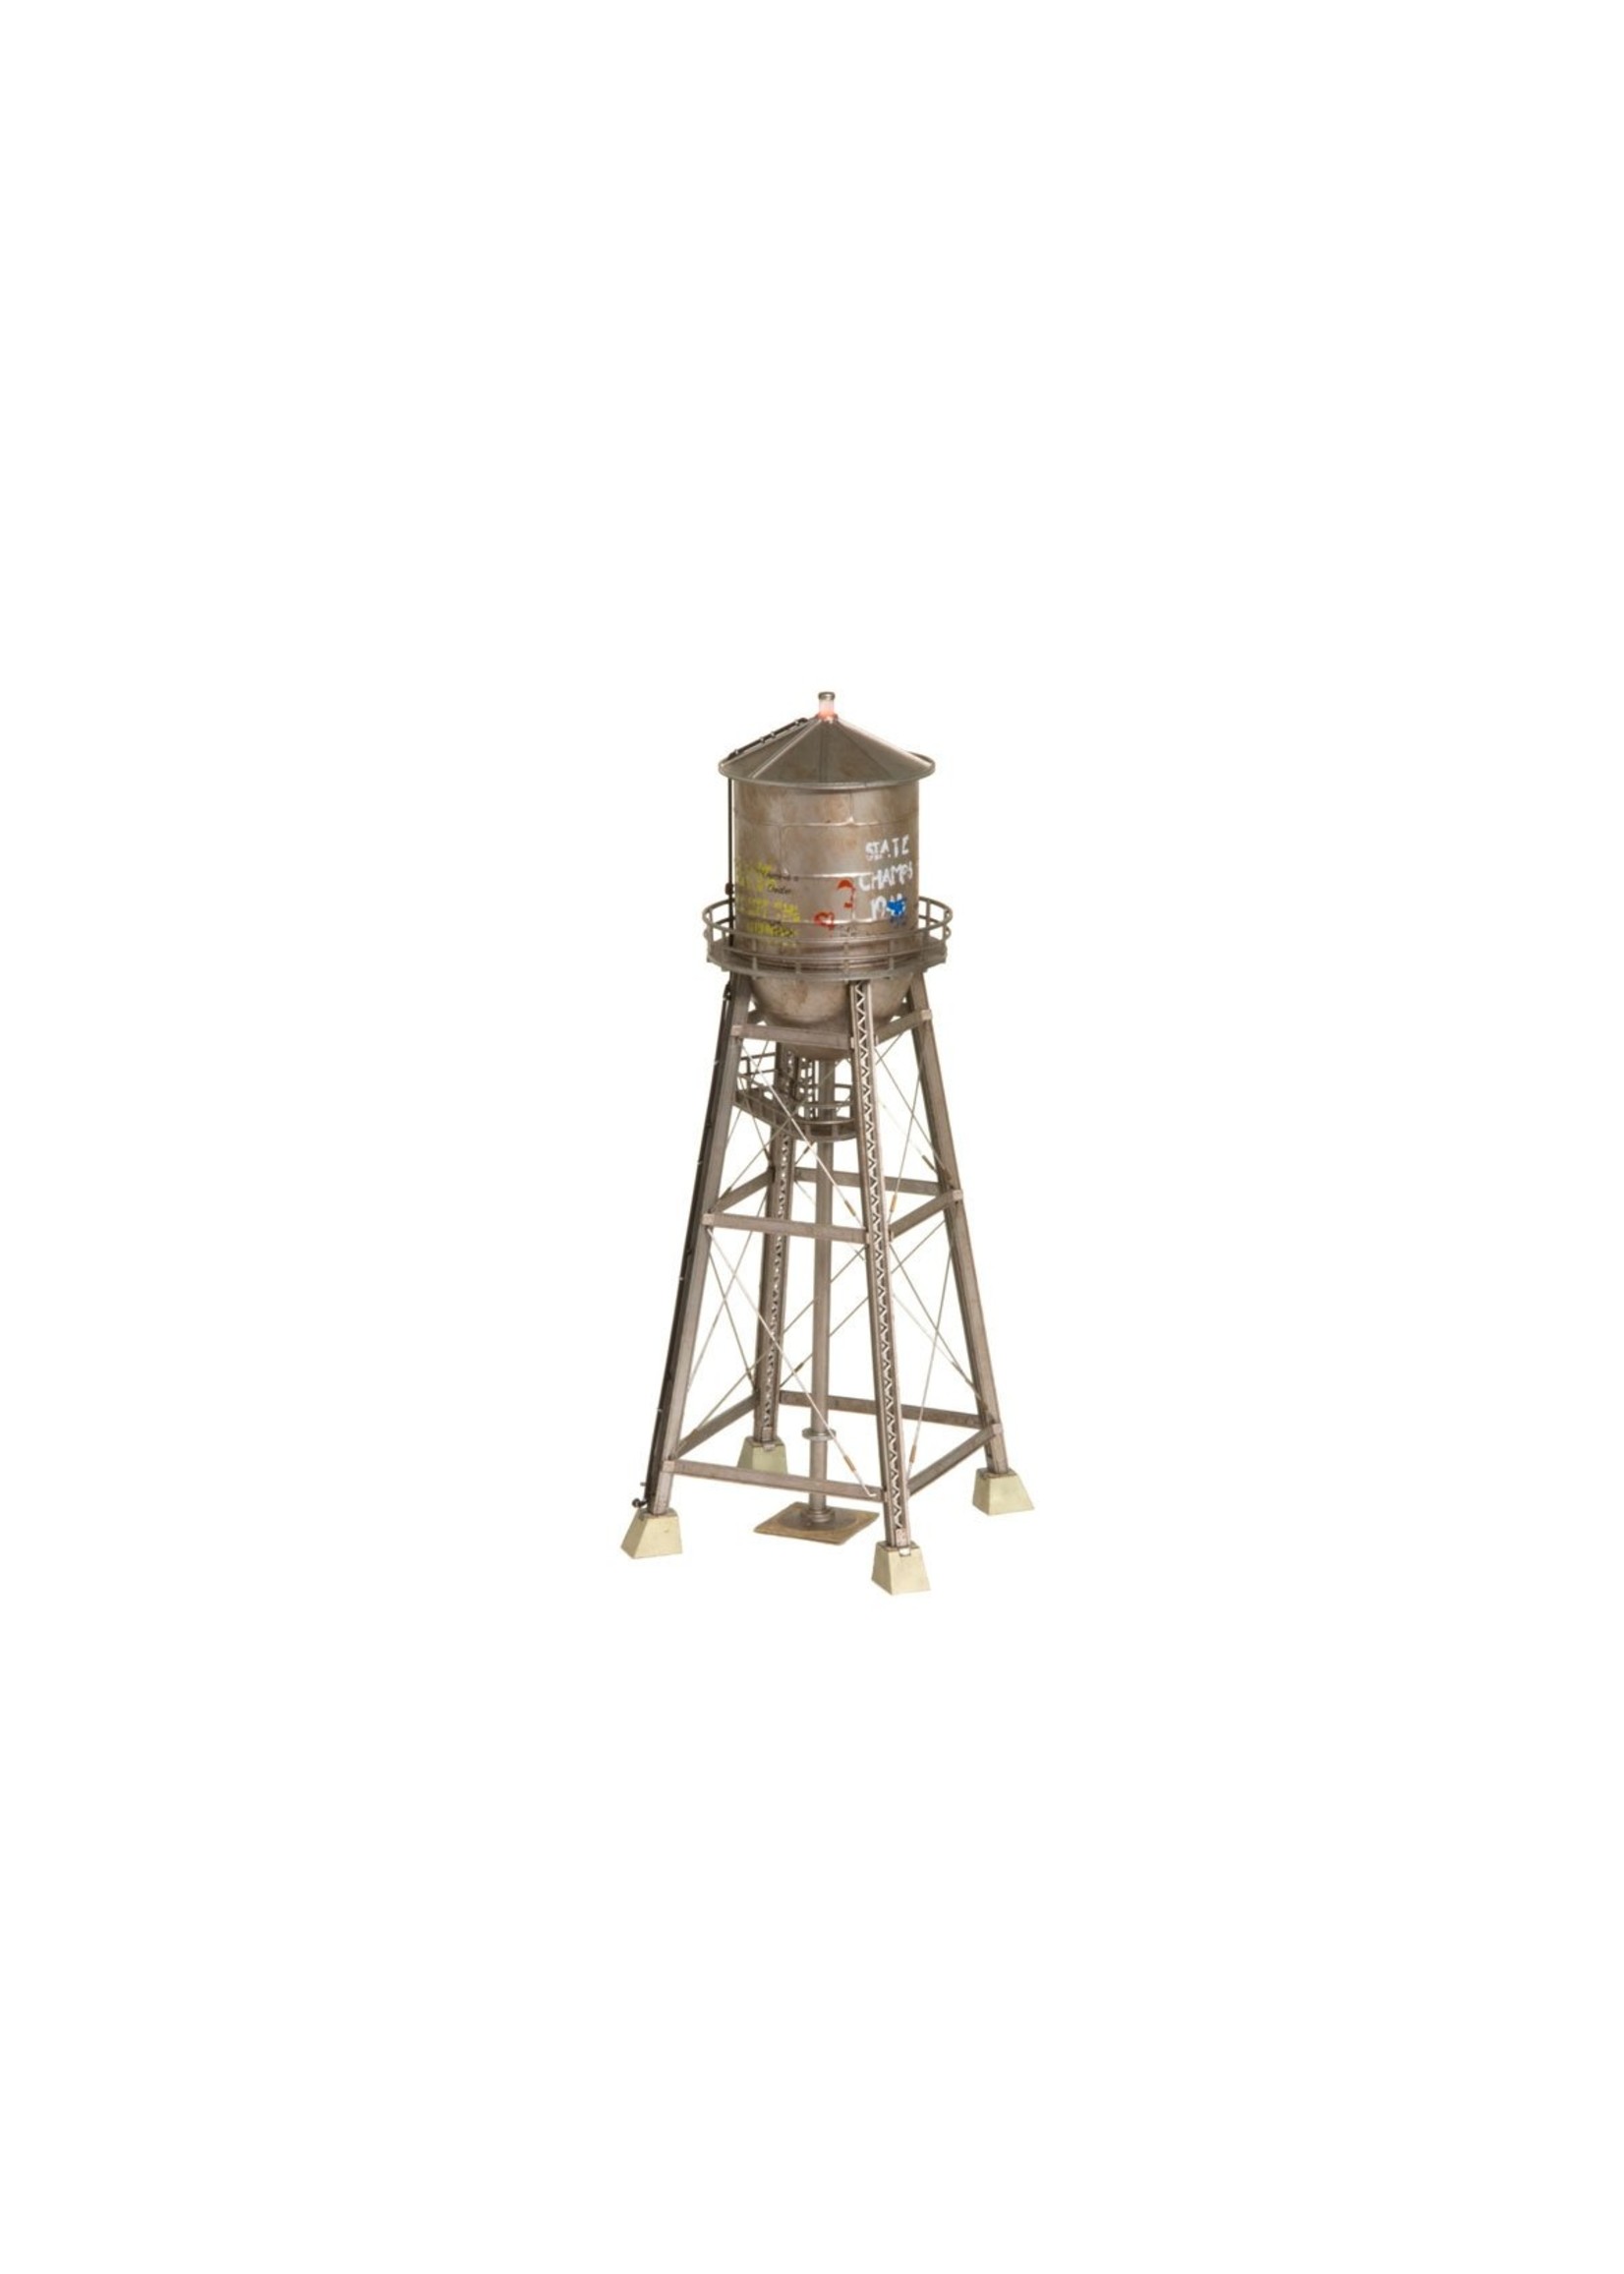 Woodland Scenics BR4954 - N Scale Rustic Water Tower